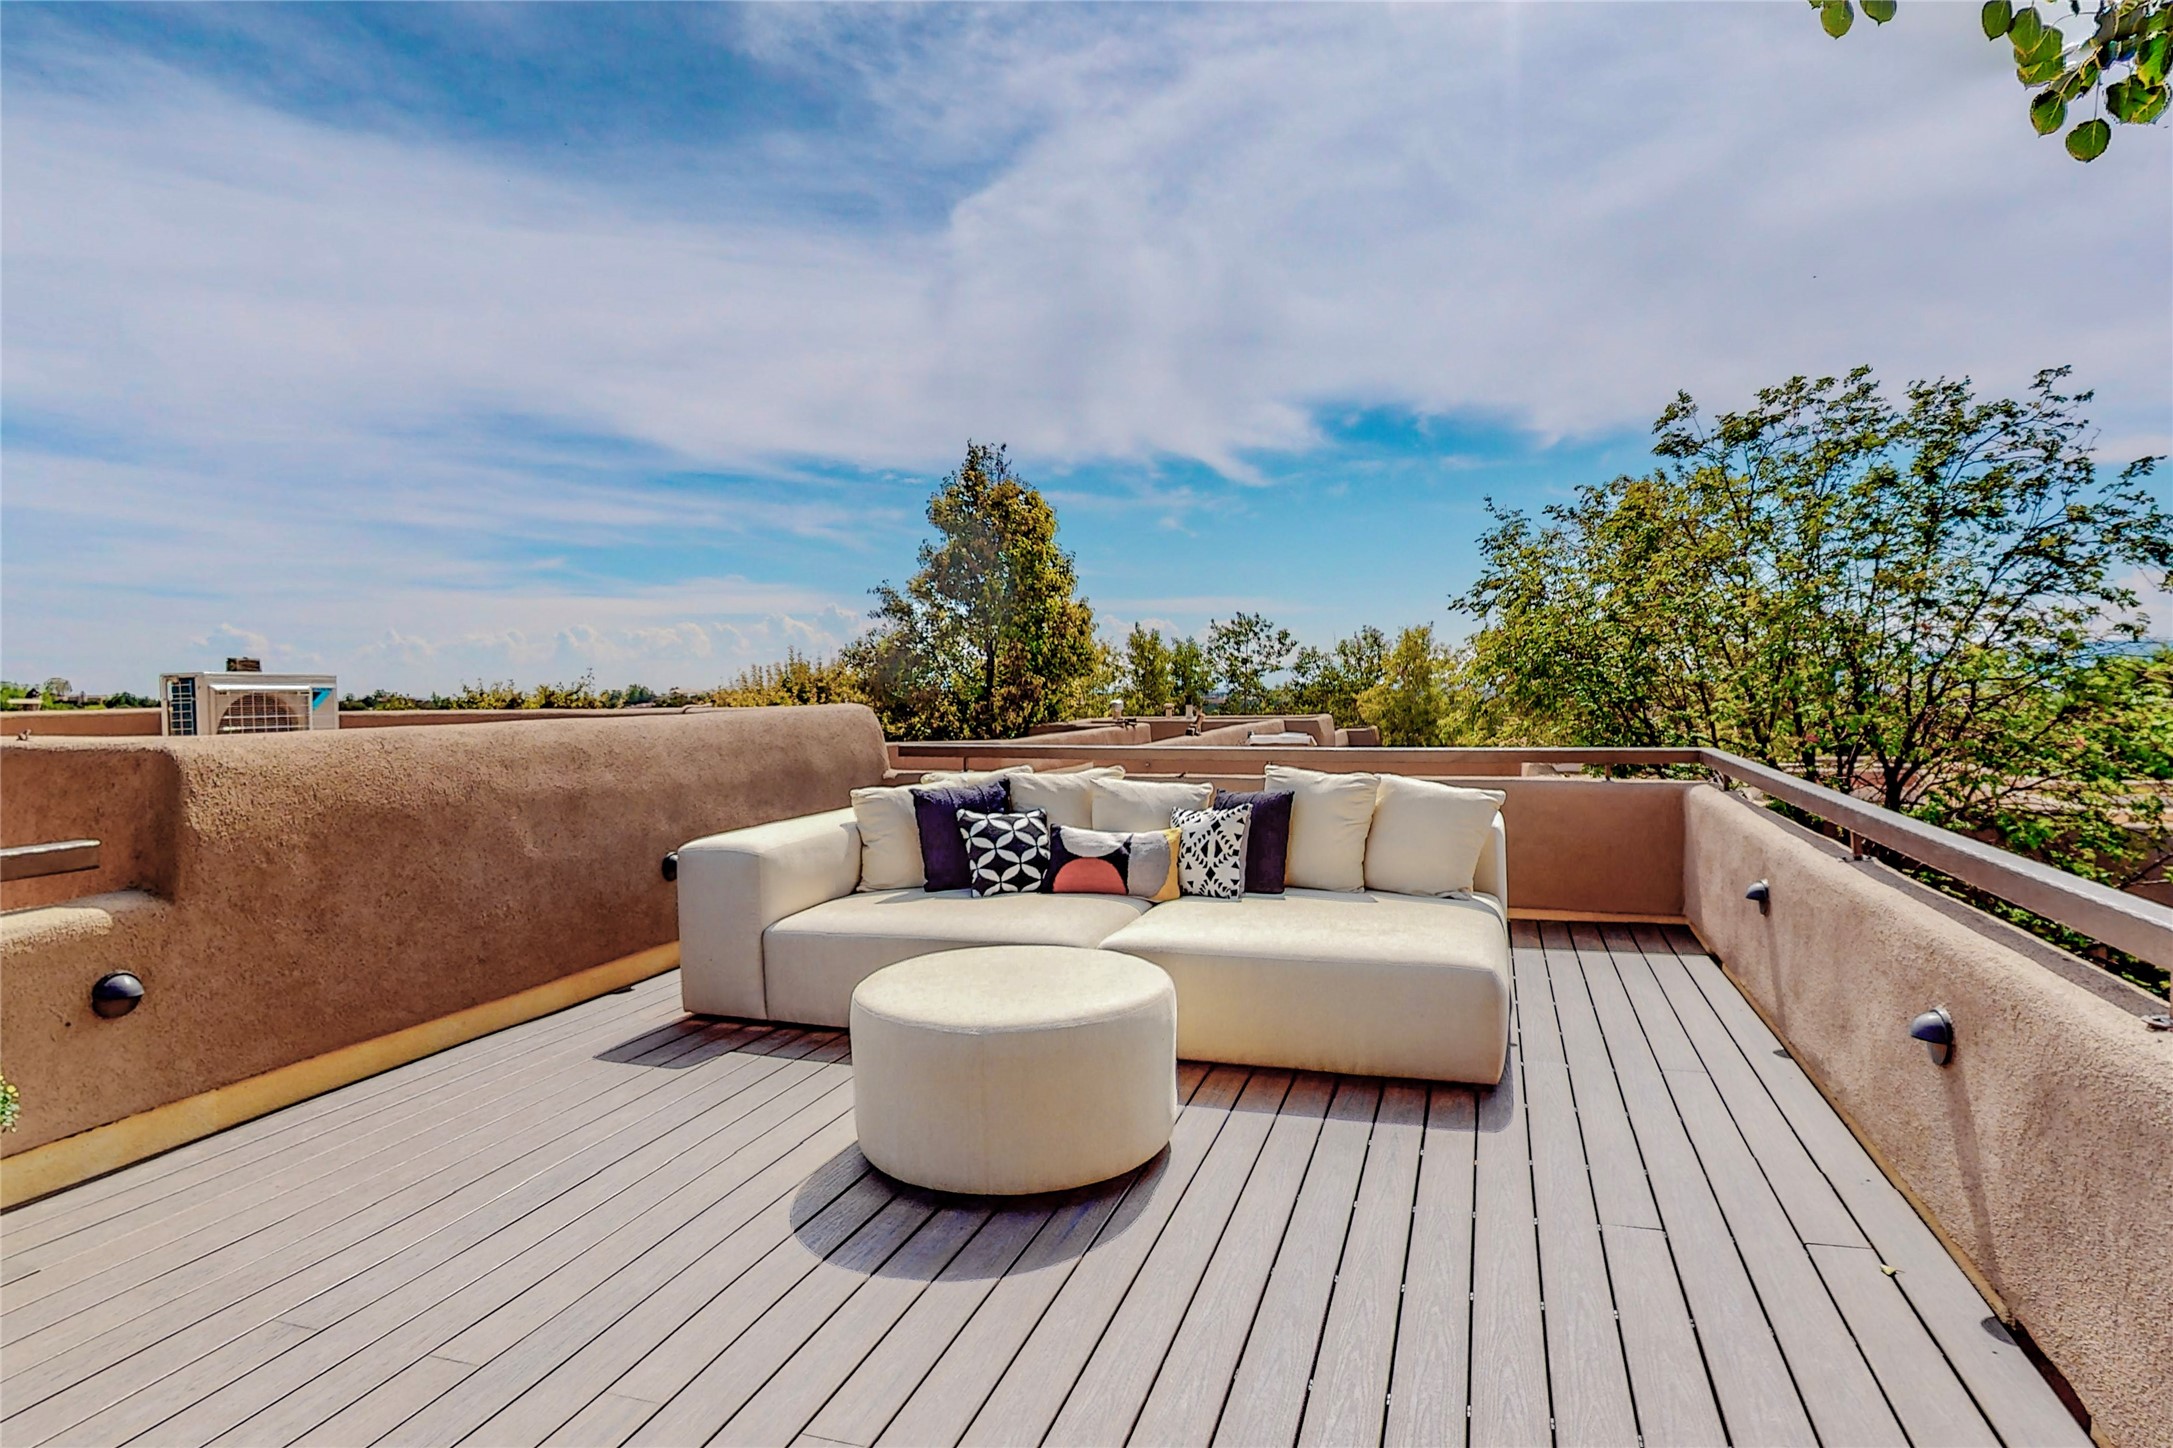 Fabulous roof deck with new Trex decking